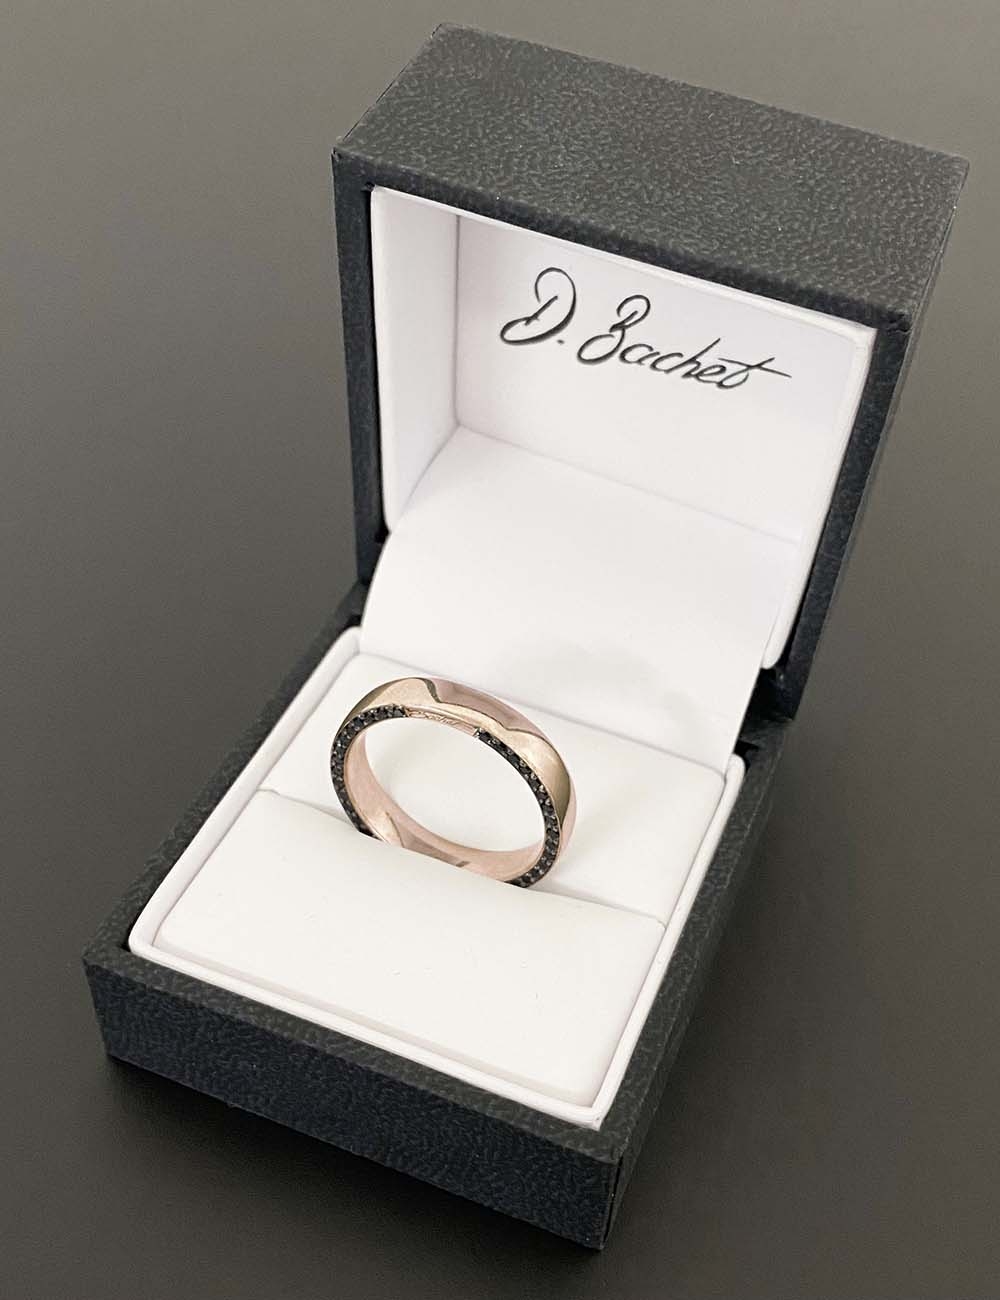 Wedding band for women and men in rose gold set with white and black diamonds on both sides